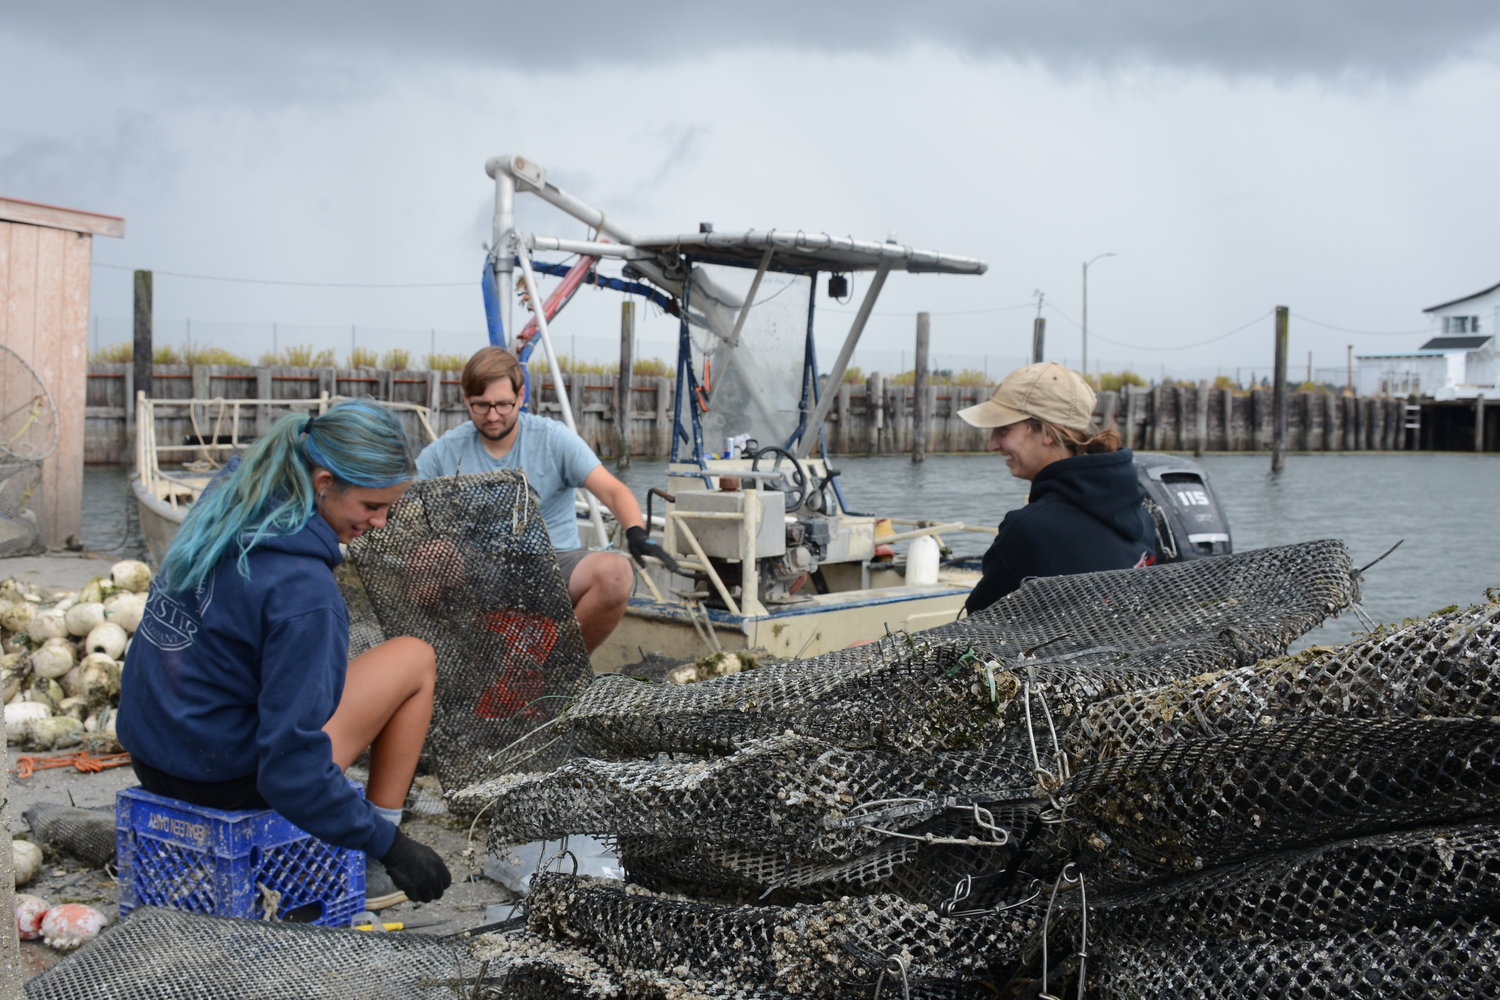 Drayton Harbor Oyster Company employees work at the end of Jorgensen Pier on August 4. The Blaine business, which grows oysters and operates a tide-to-table restaurant, is seeking to add an off-bottom oyster farm in Drayton Harbor.